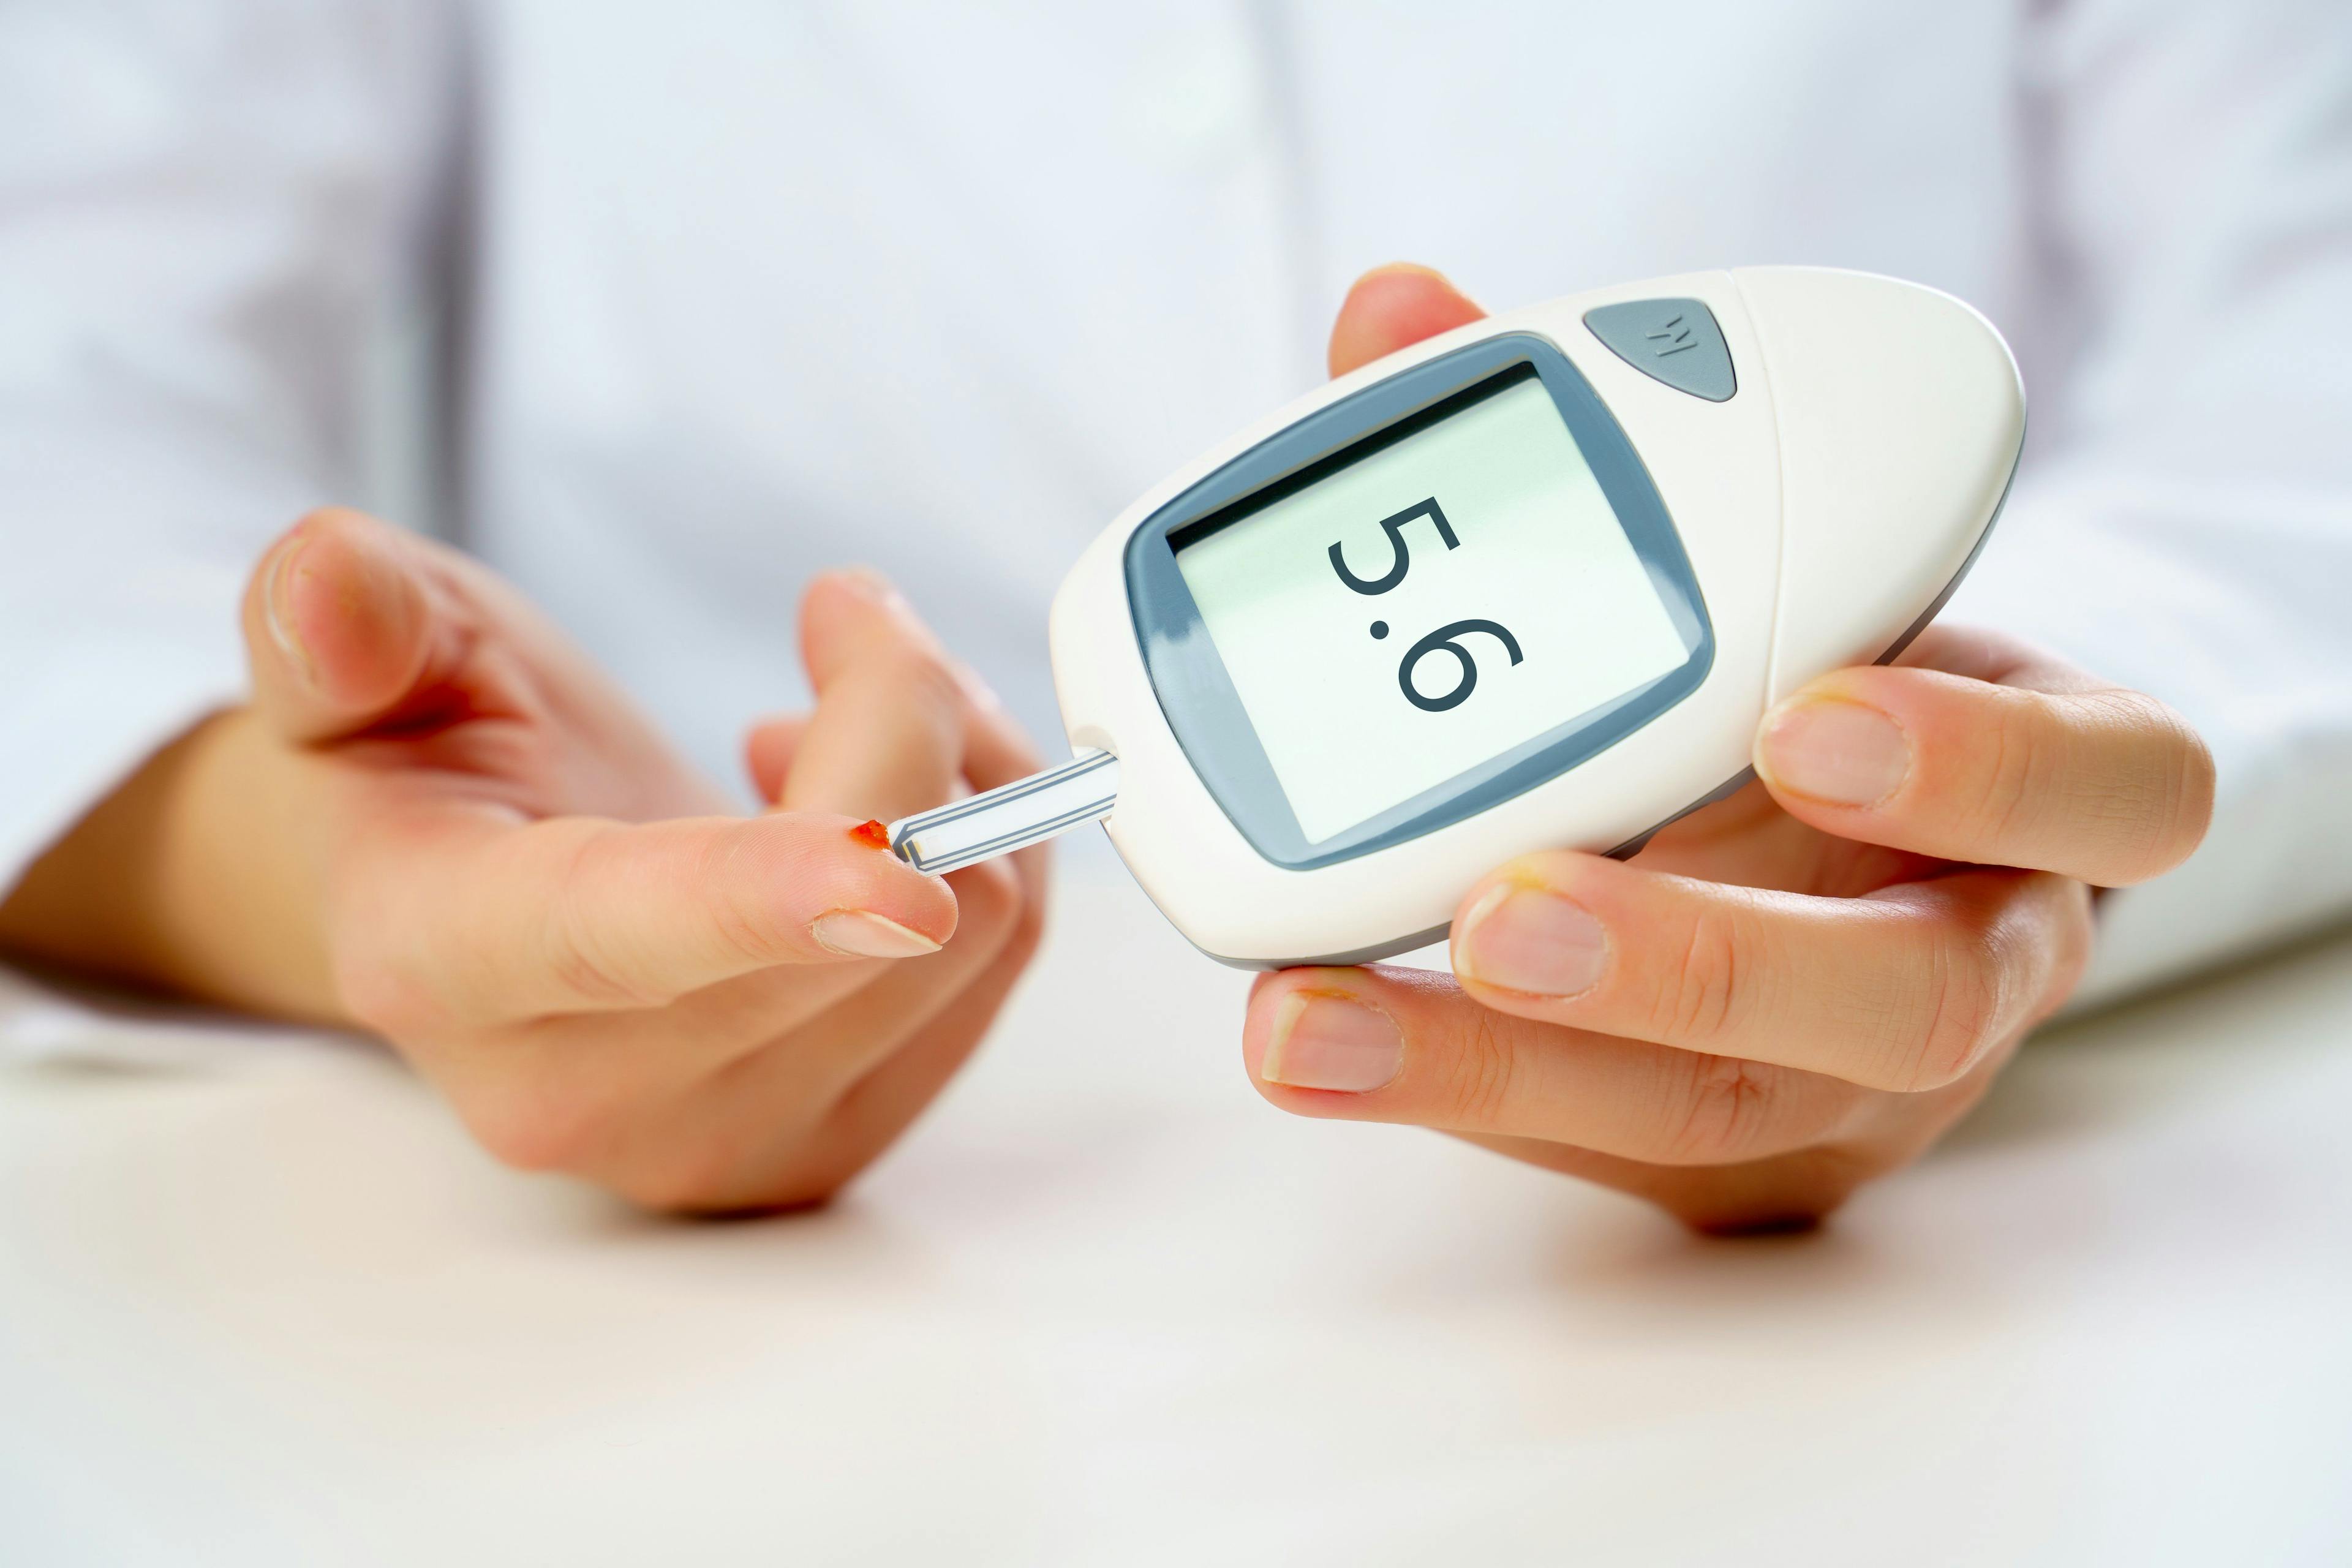 Glycemic Outcomes Well Managed Under Virtual Diabetes Care